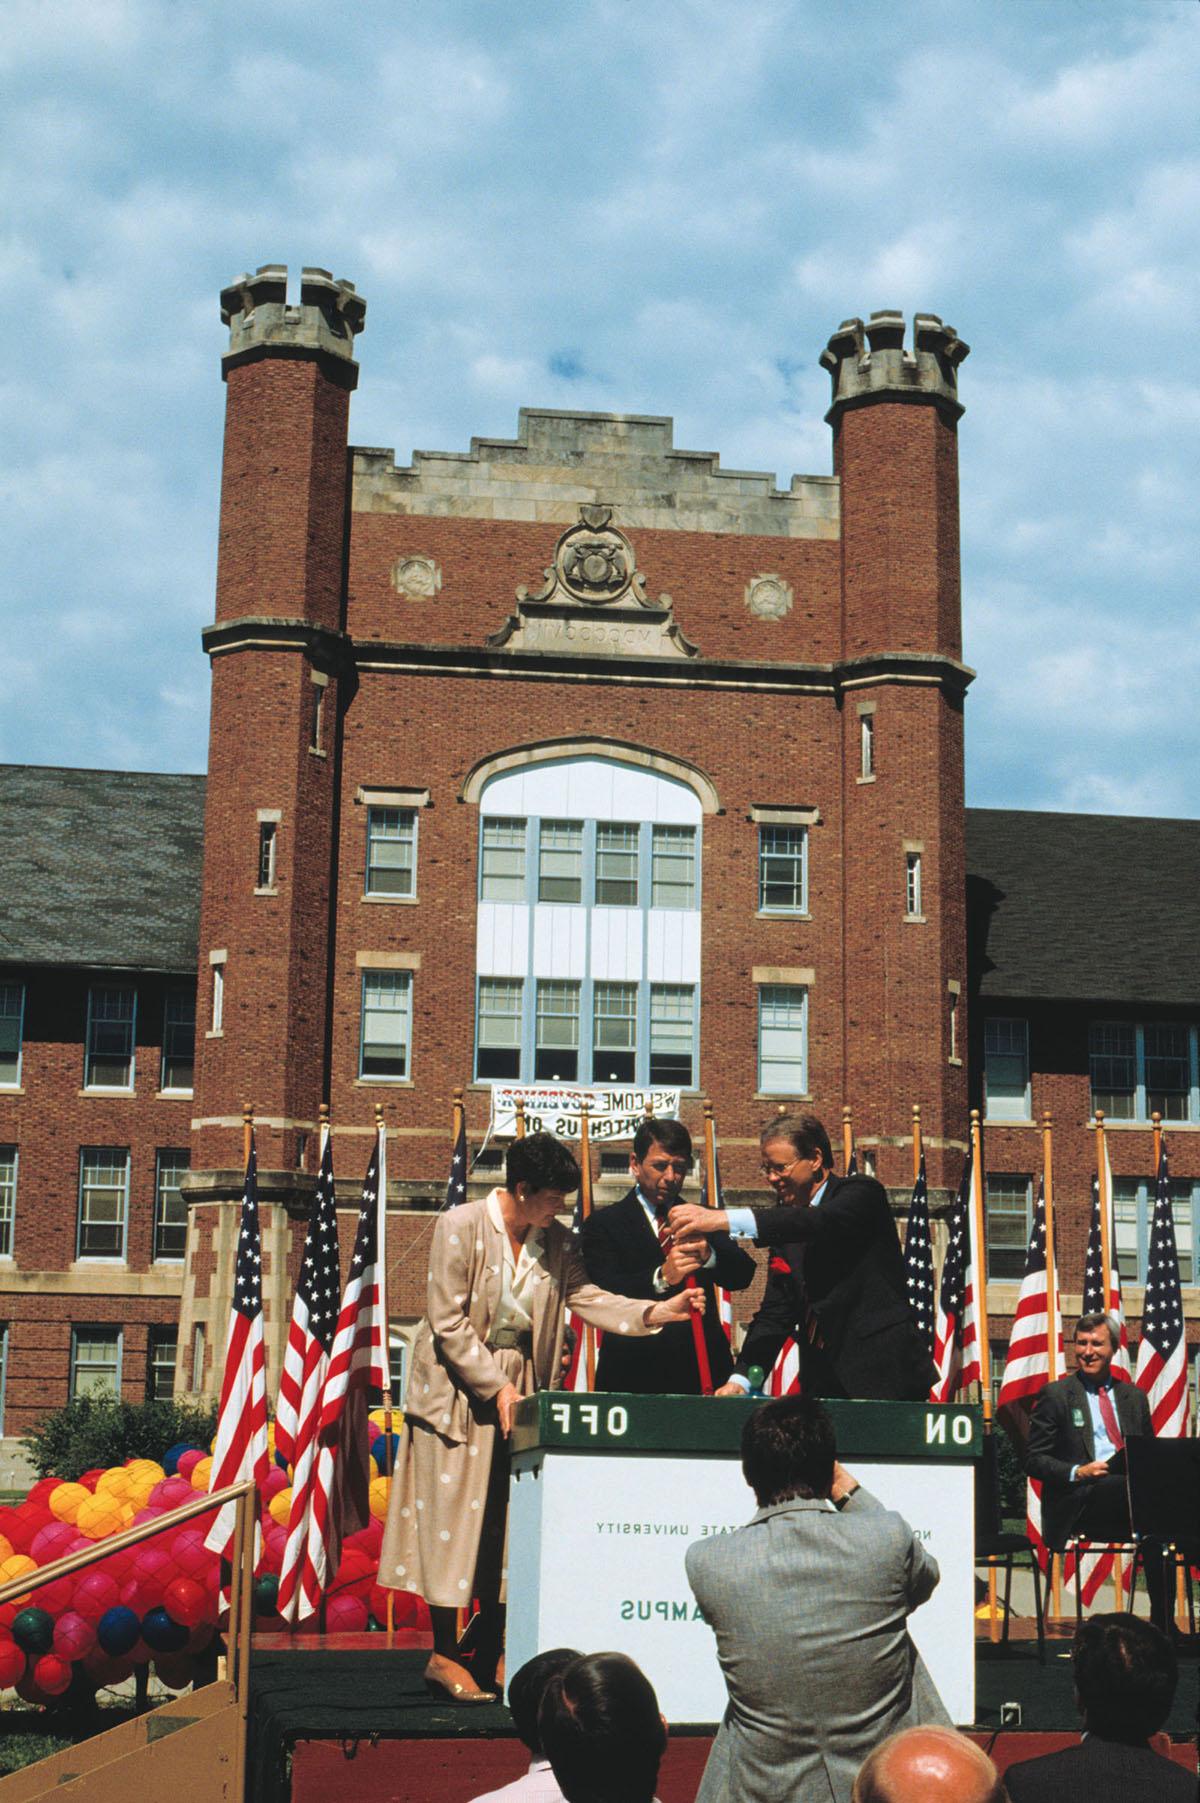 Northwest President Dean Hubbard (left) pulls a ceremonial switch, marking the launch of the University’s “Electronic Campus” on Aug. 18, 1987, with Gov. John Ashcroft and Shaila Aery, Missouri’s commissioner for higher education. Northwest was the first public university in the nation to have a campus-wide computing system.